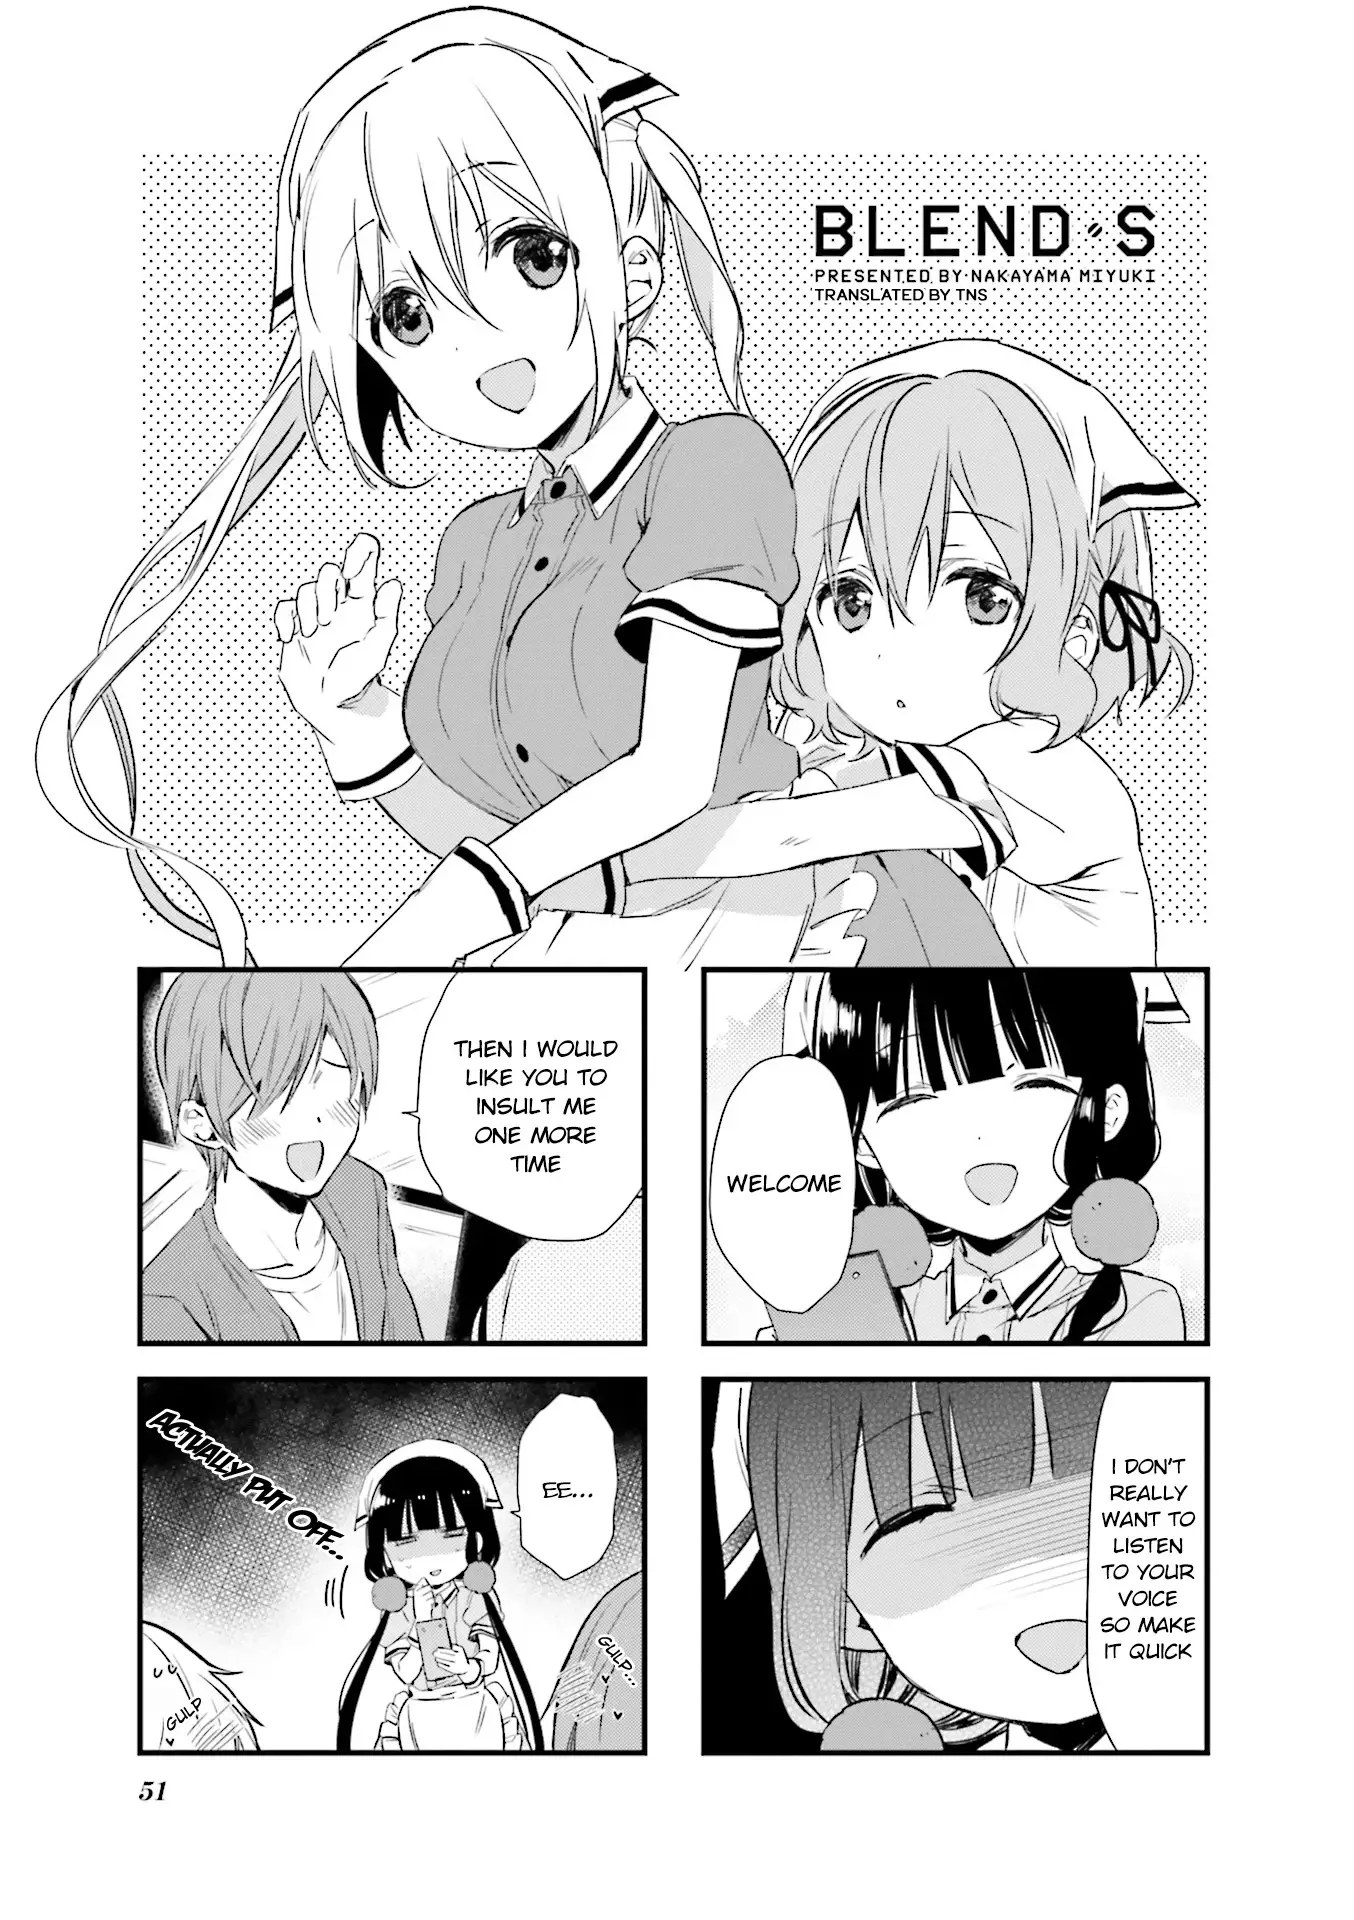 Blend S - 48 page 1-ceb8f242